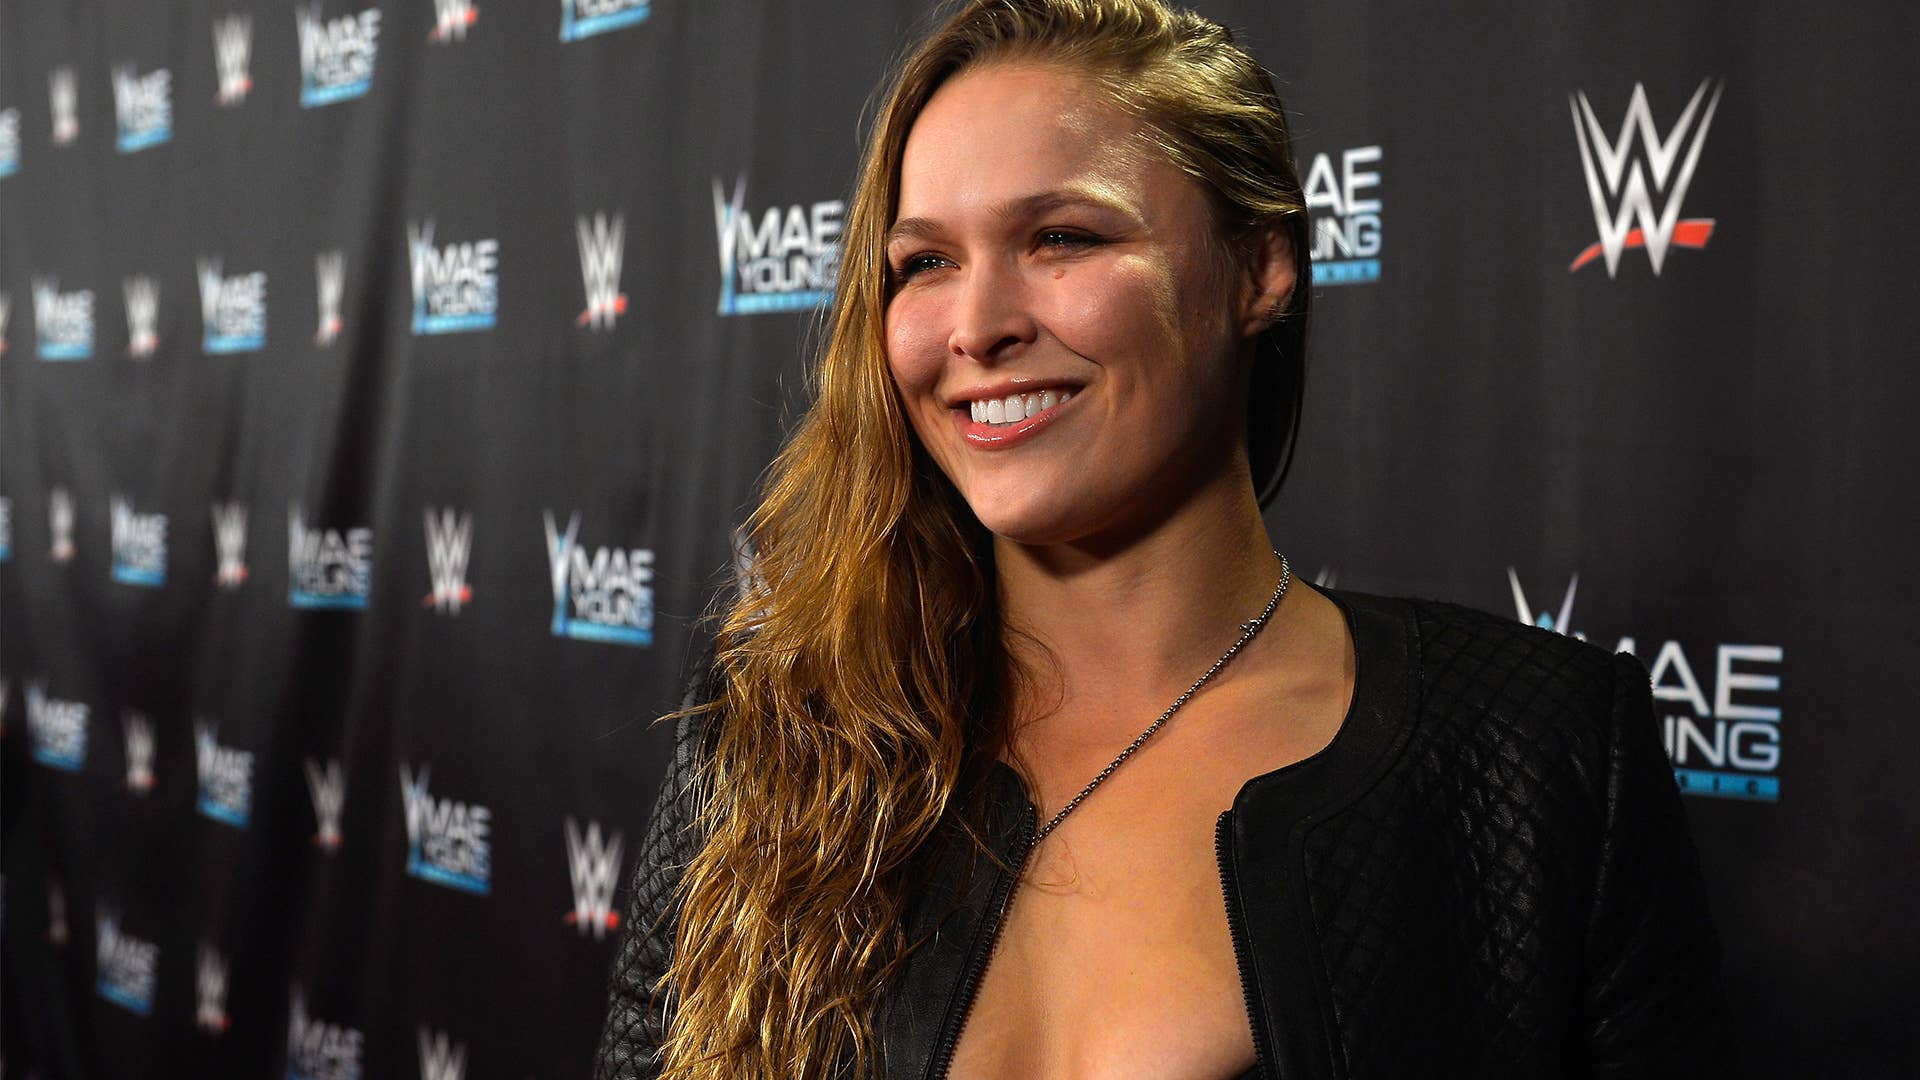 This is a photo of Ronda Rousey.